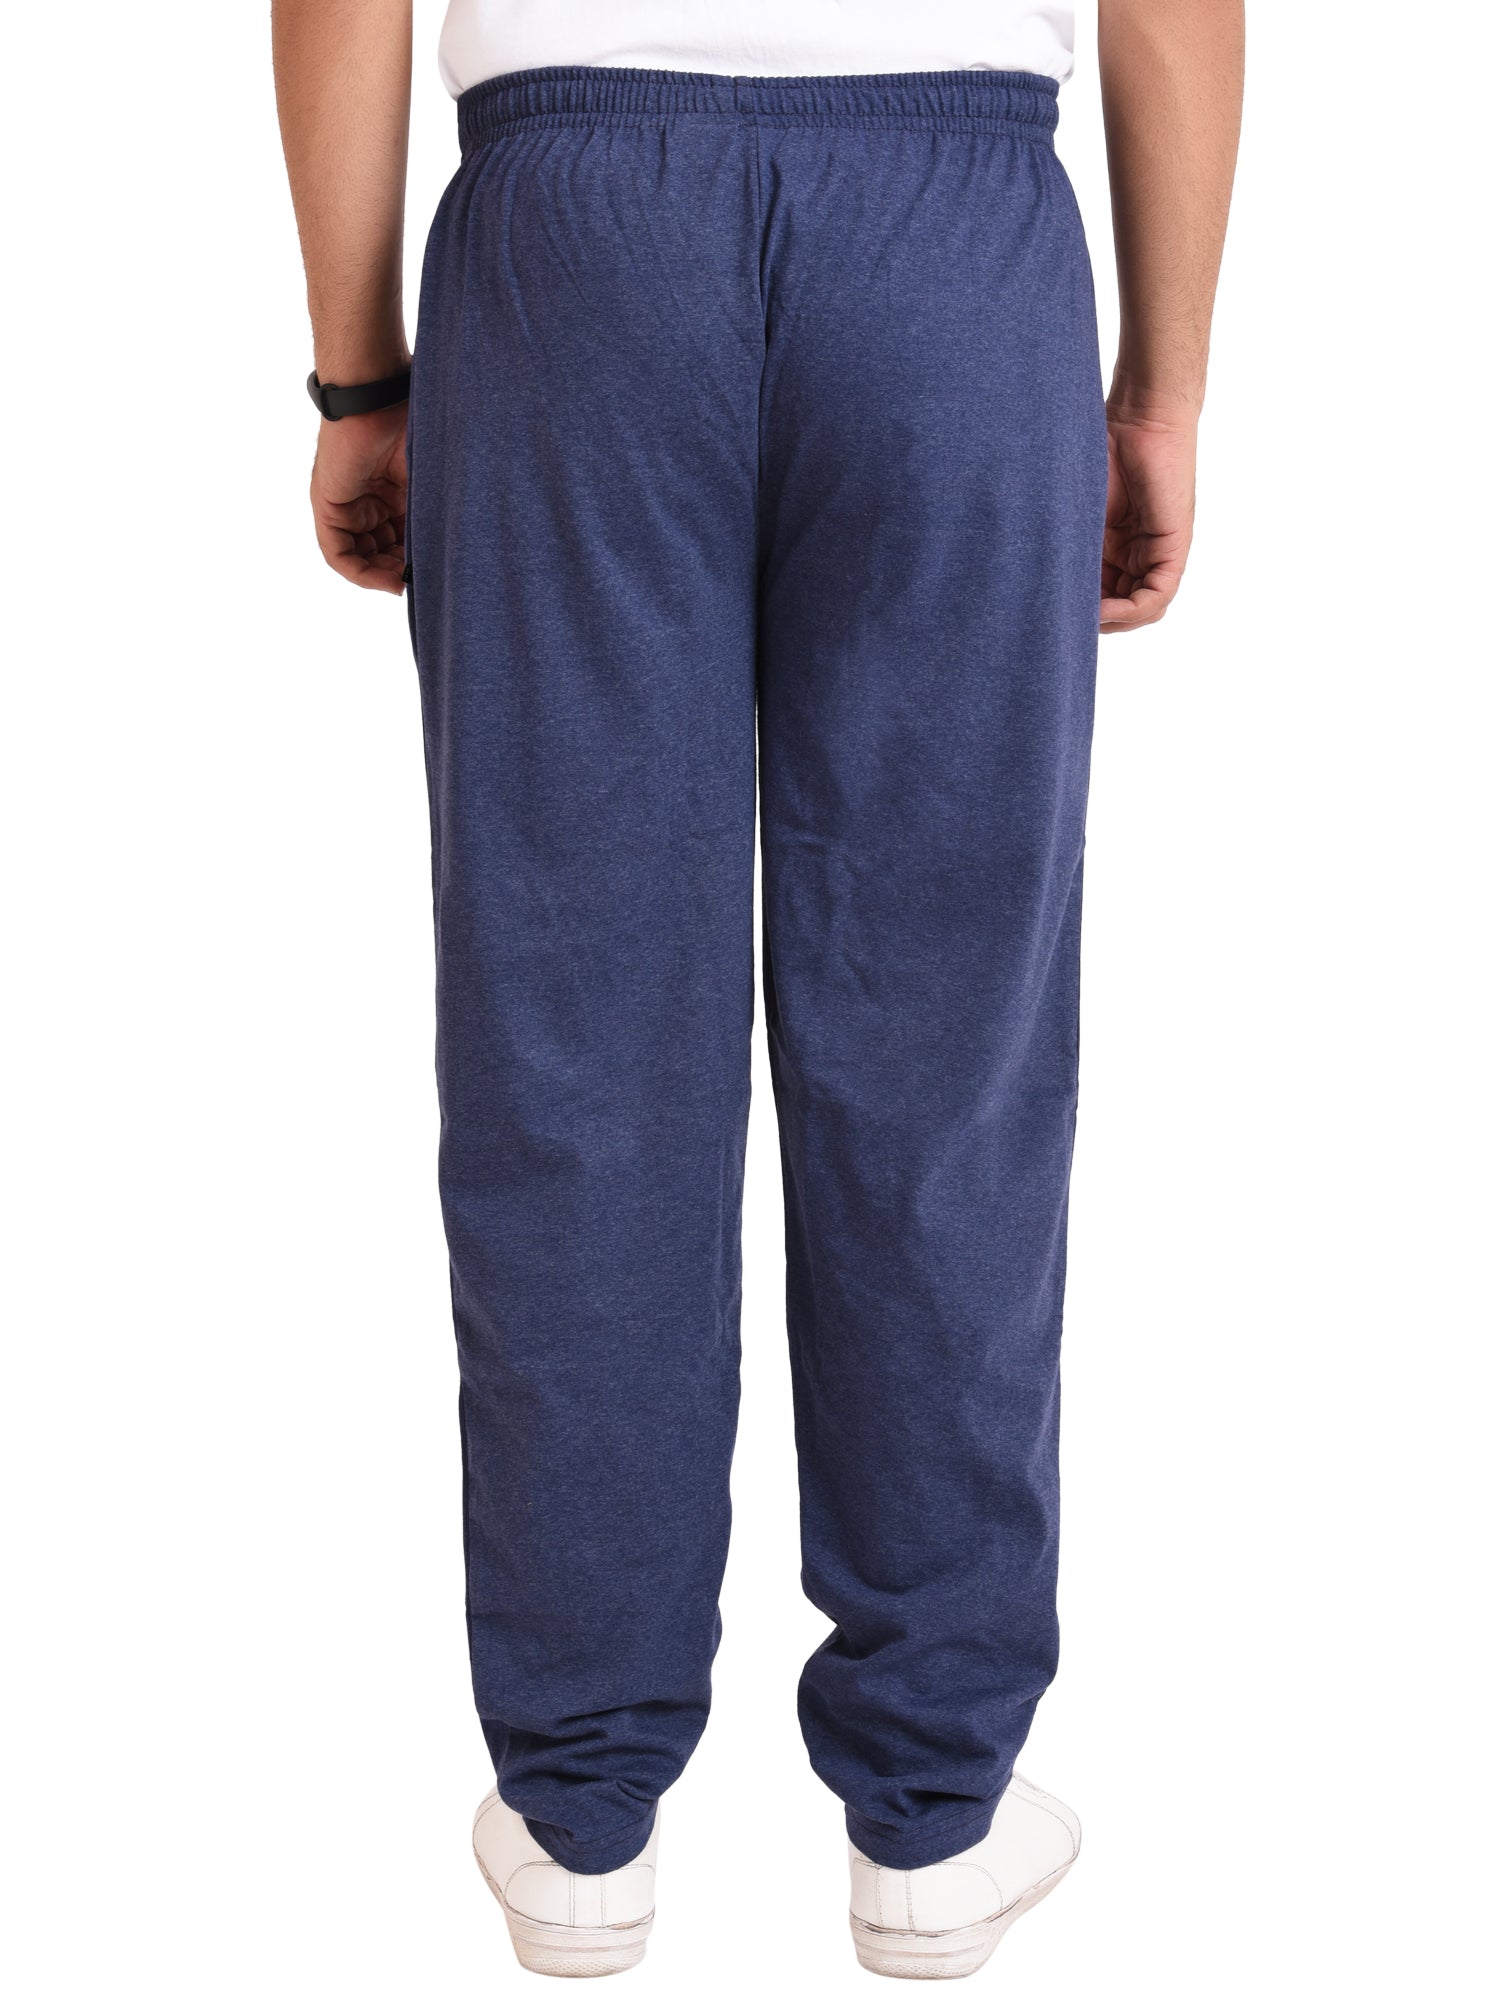 The Cotton Company 100% Cotton Lounge and Track Pants for Men - Solid  (Light Grey, Small) Relaxed : Amazon.in: Fashion